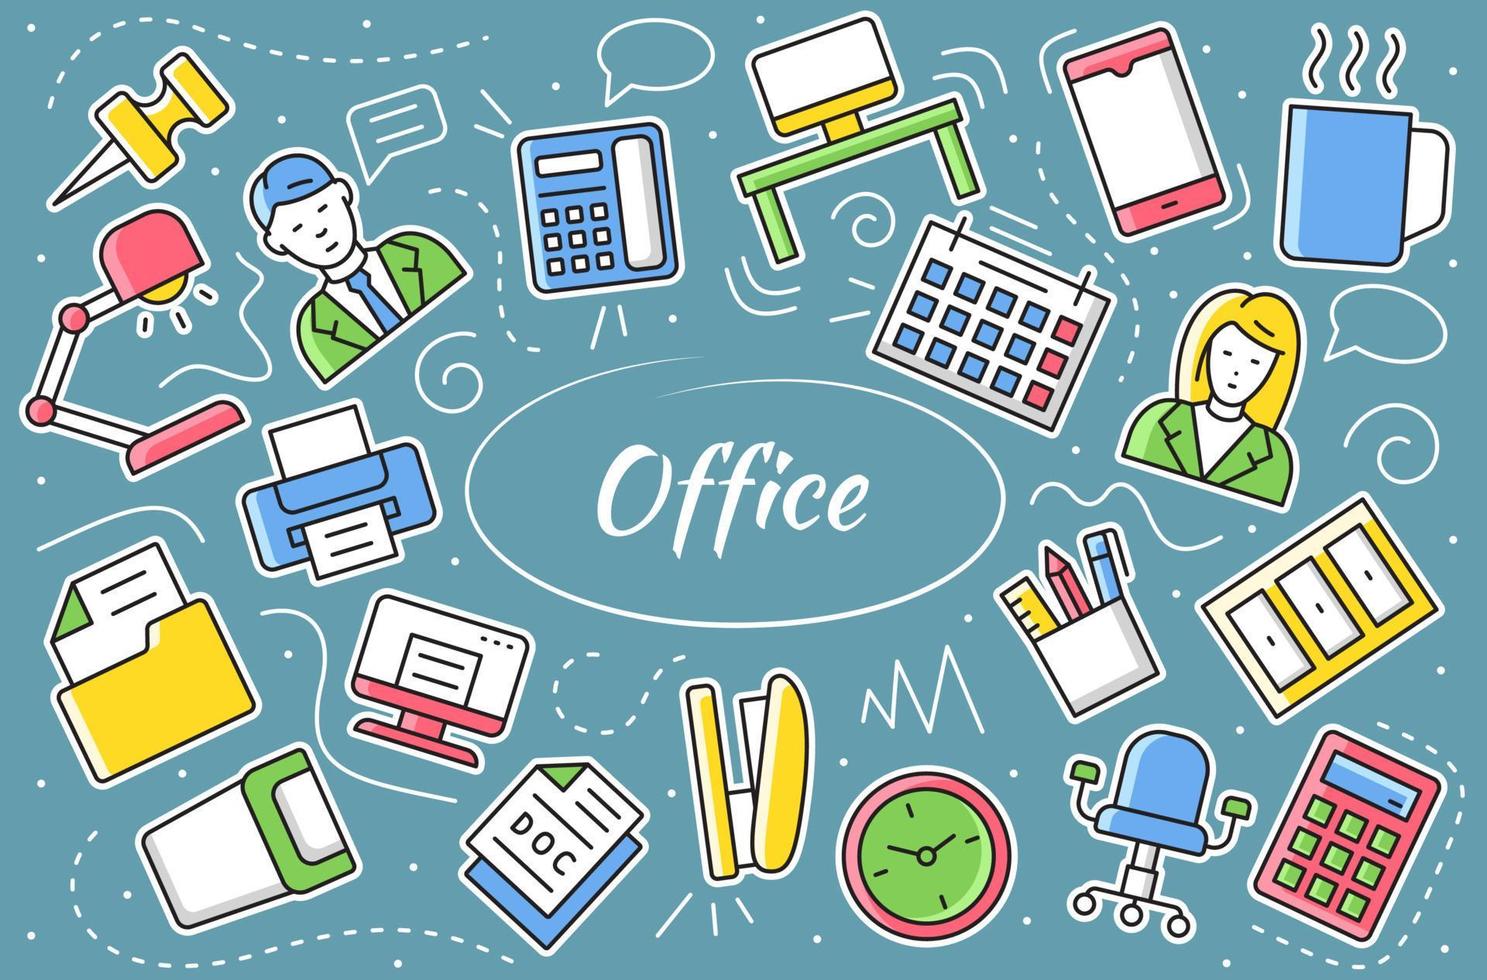 Office workspace - sticker set. Elements and objects collection. Simple vector illustration.